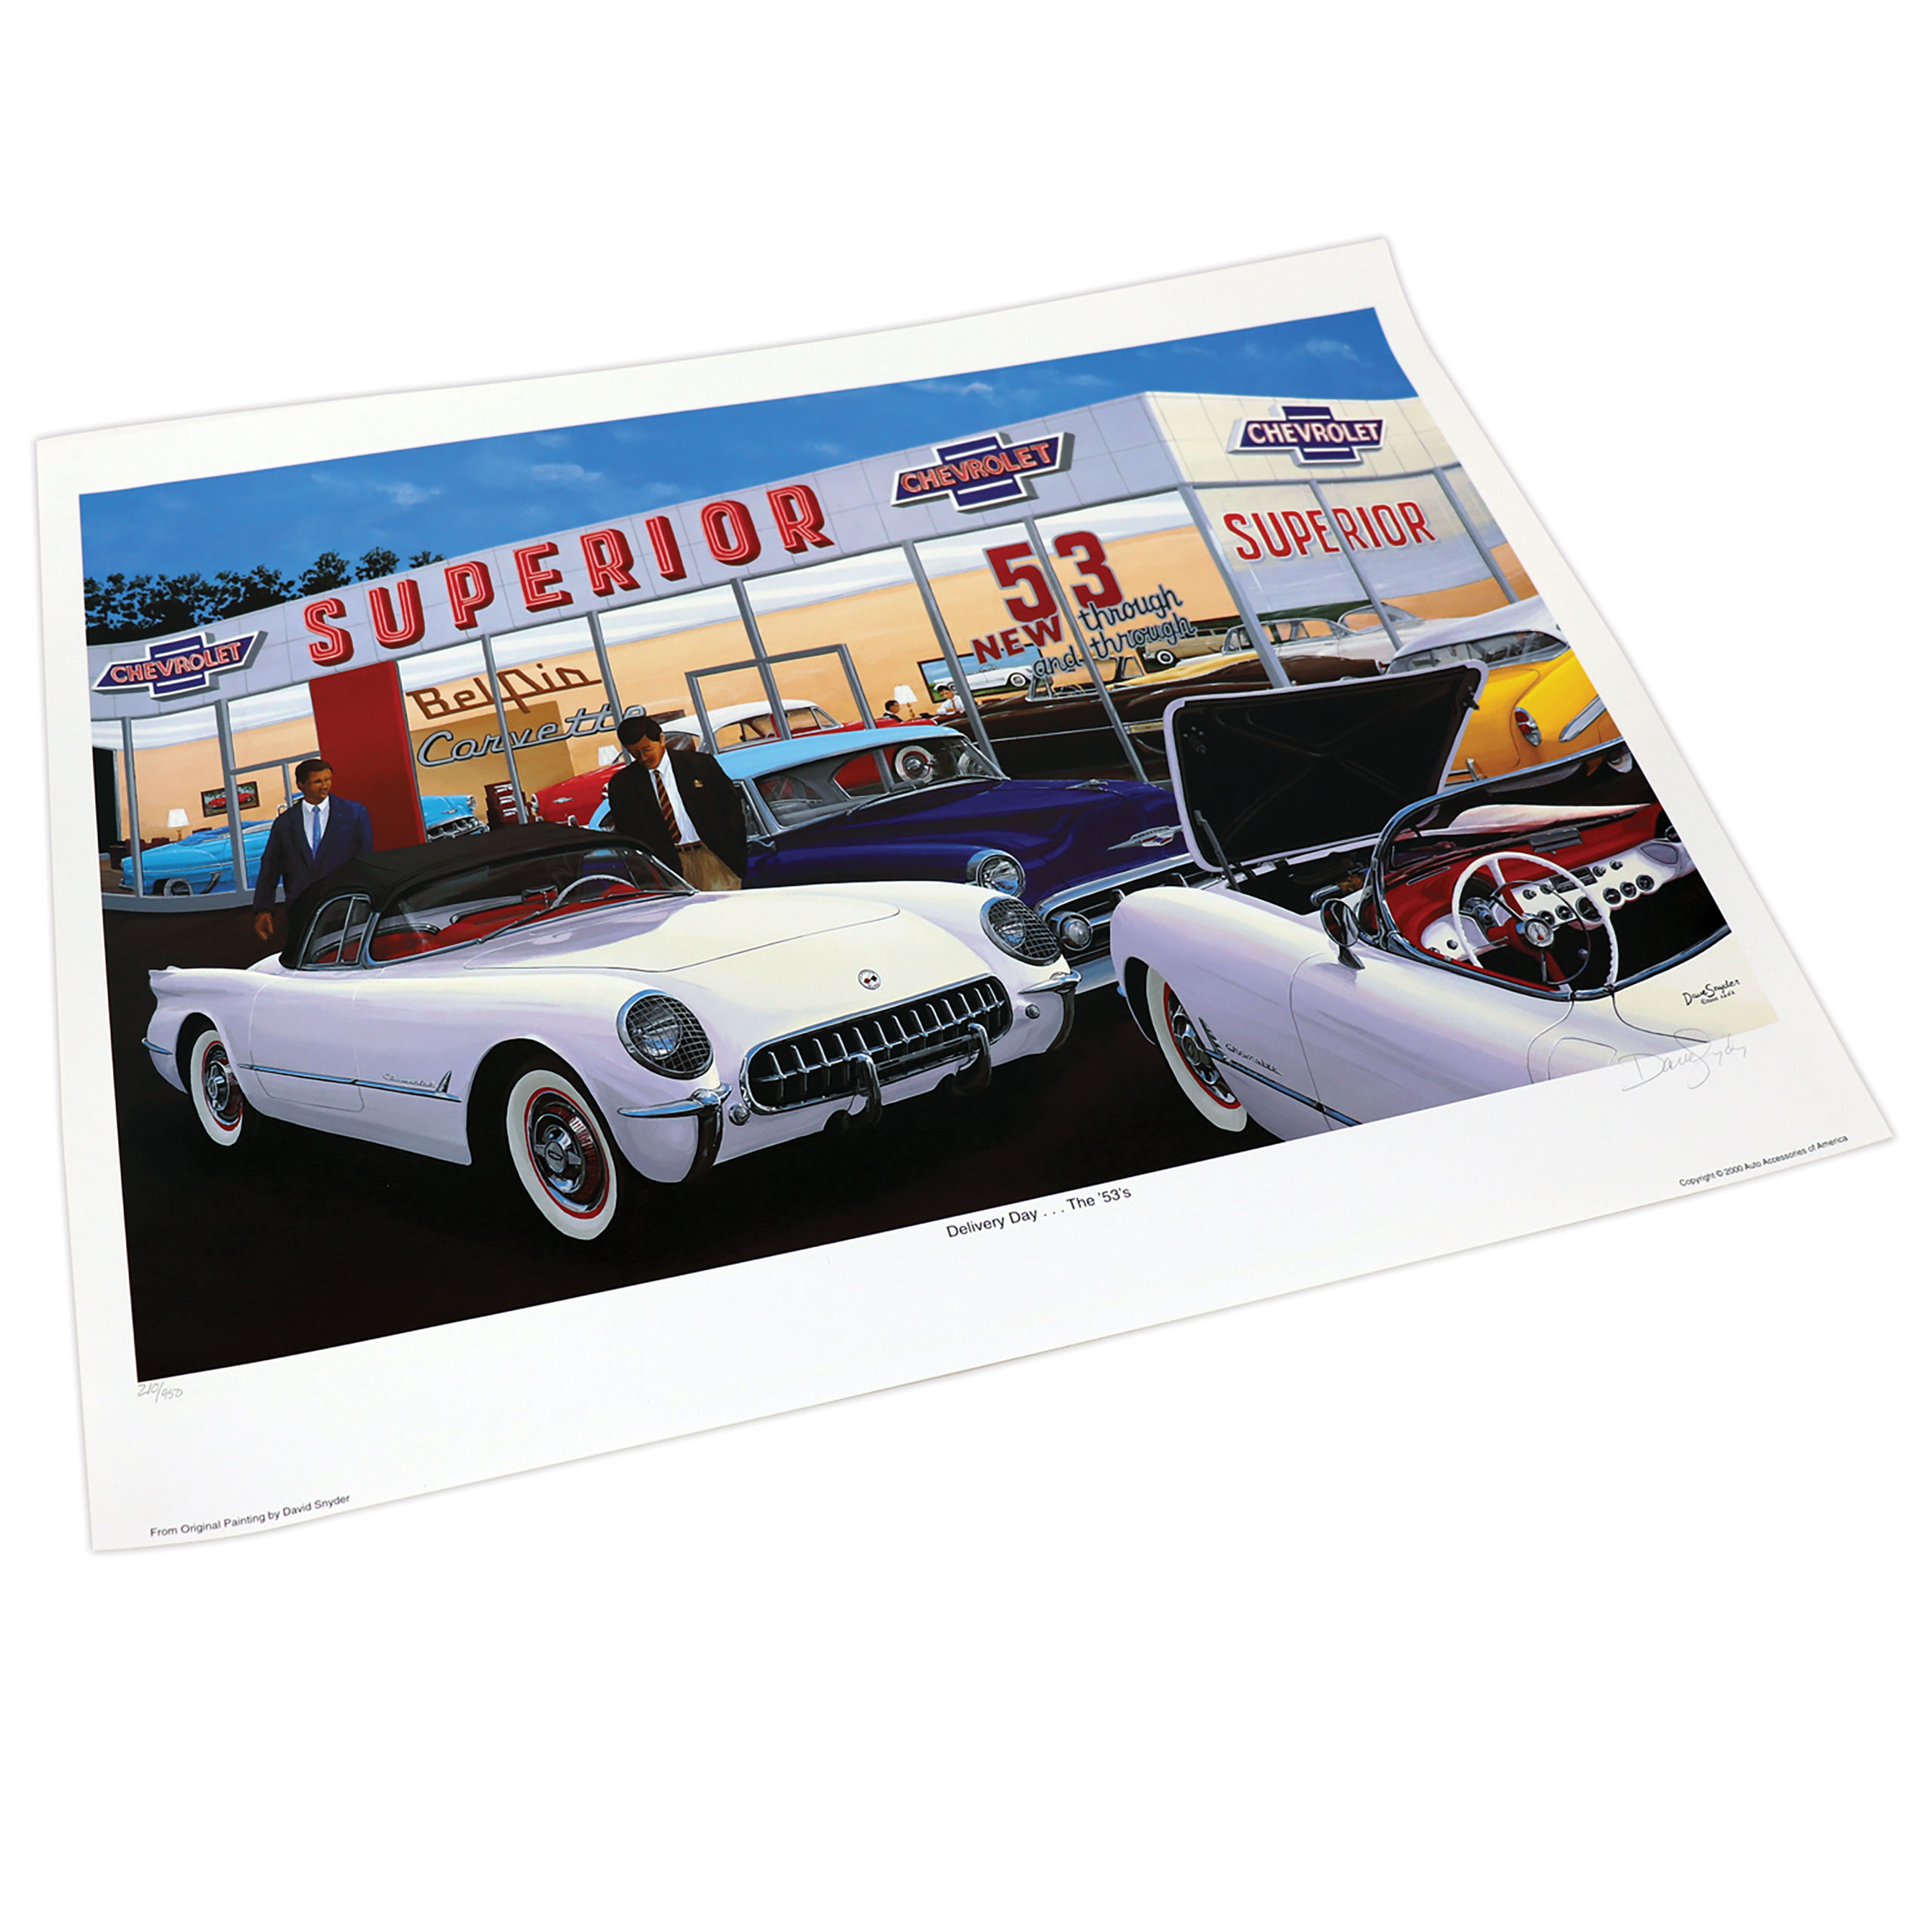 C1 1953 Chevrolet Corvette Delivery Day: The 53's Limited Edition Print - David Snyder